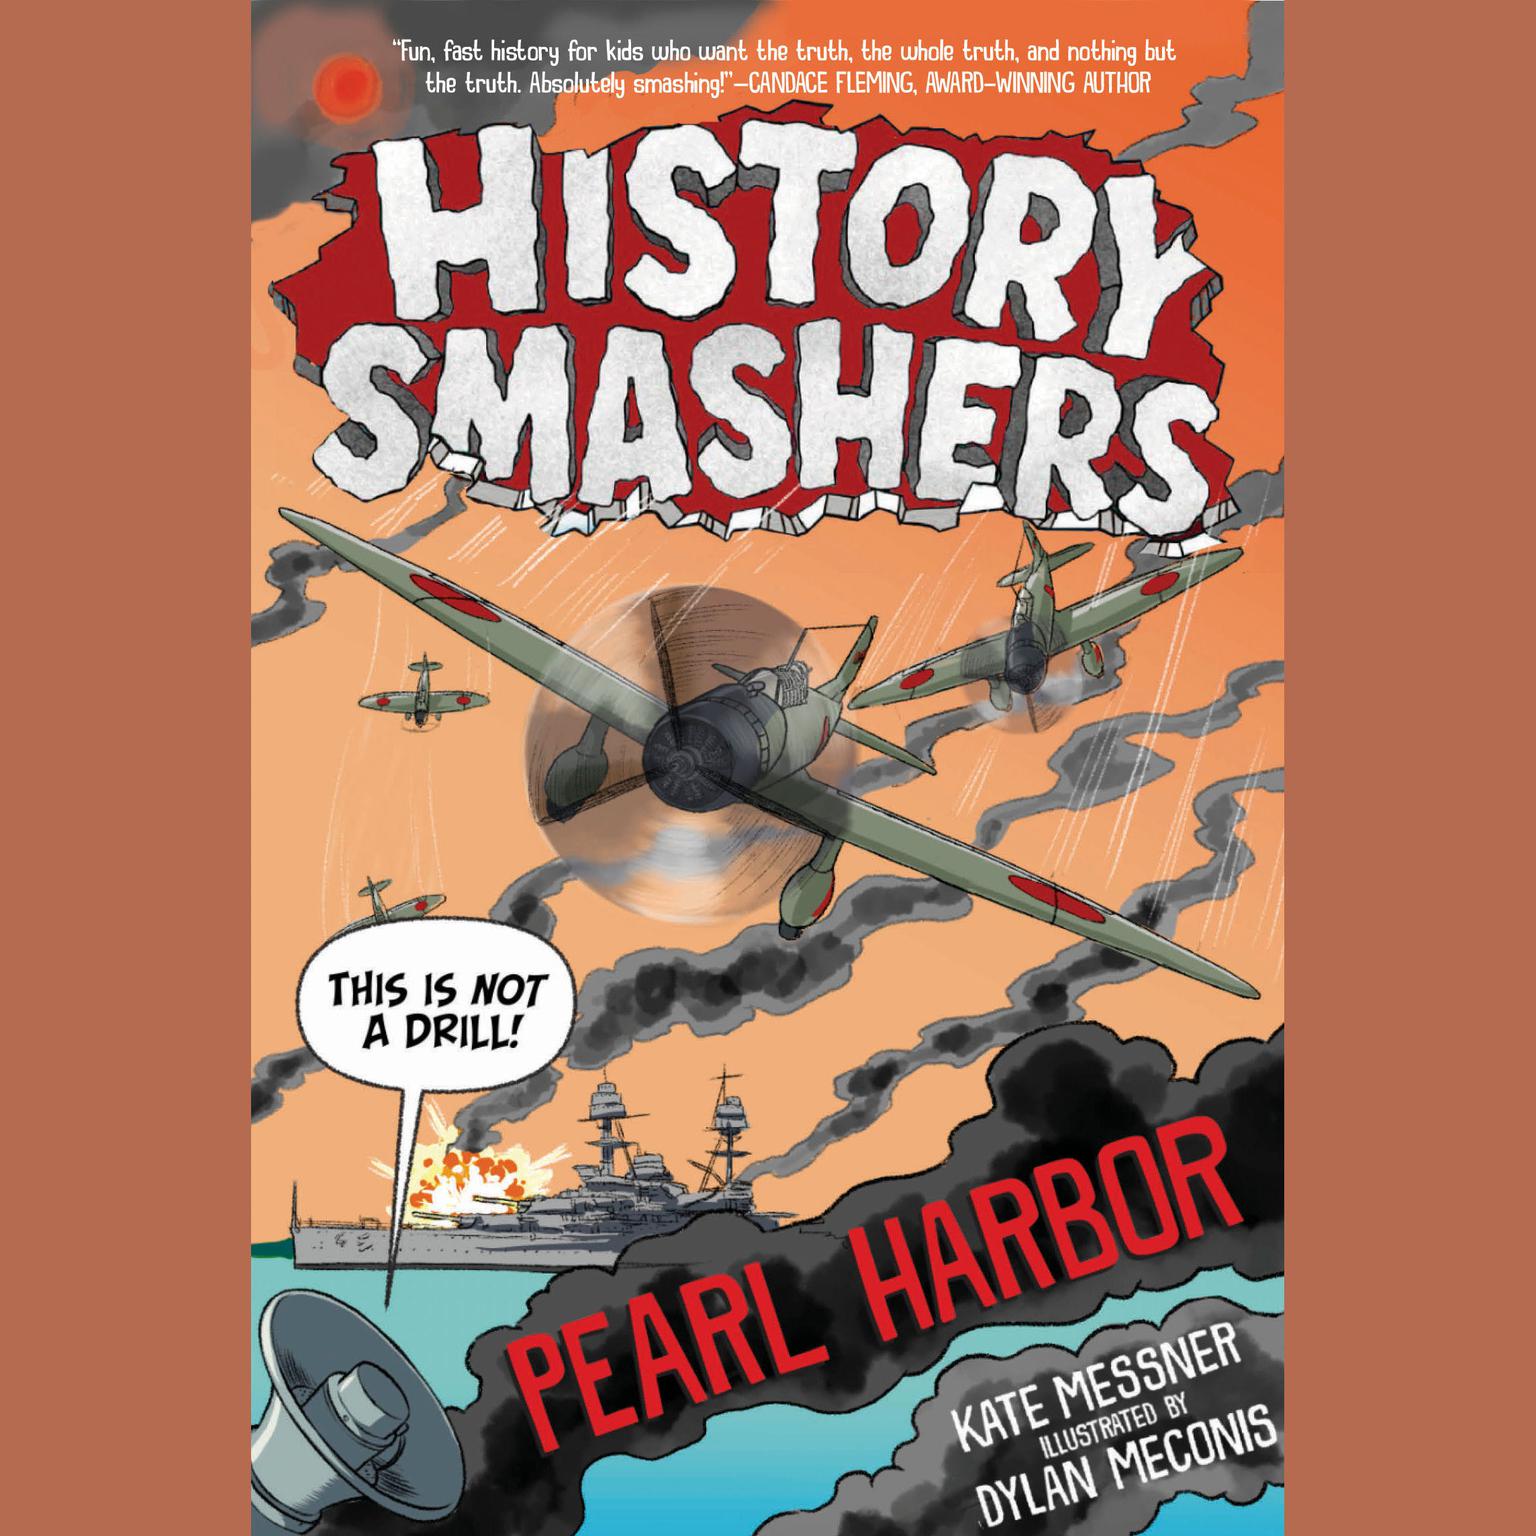 History Smashers: Pearl Harbor Audiobook, by Kate Messner